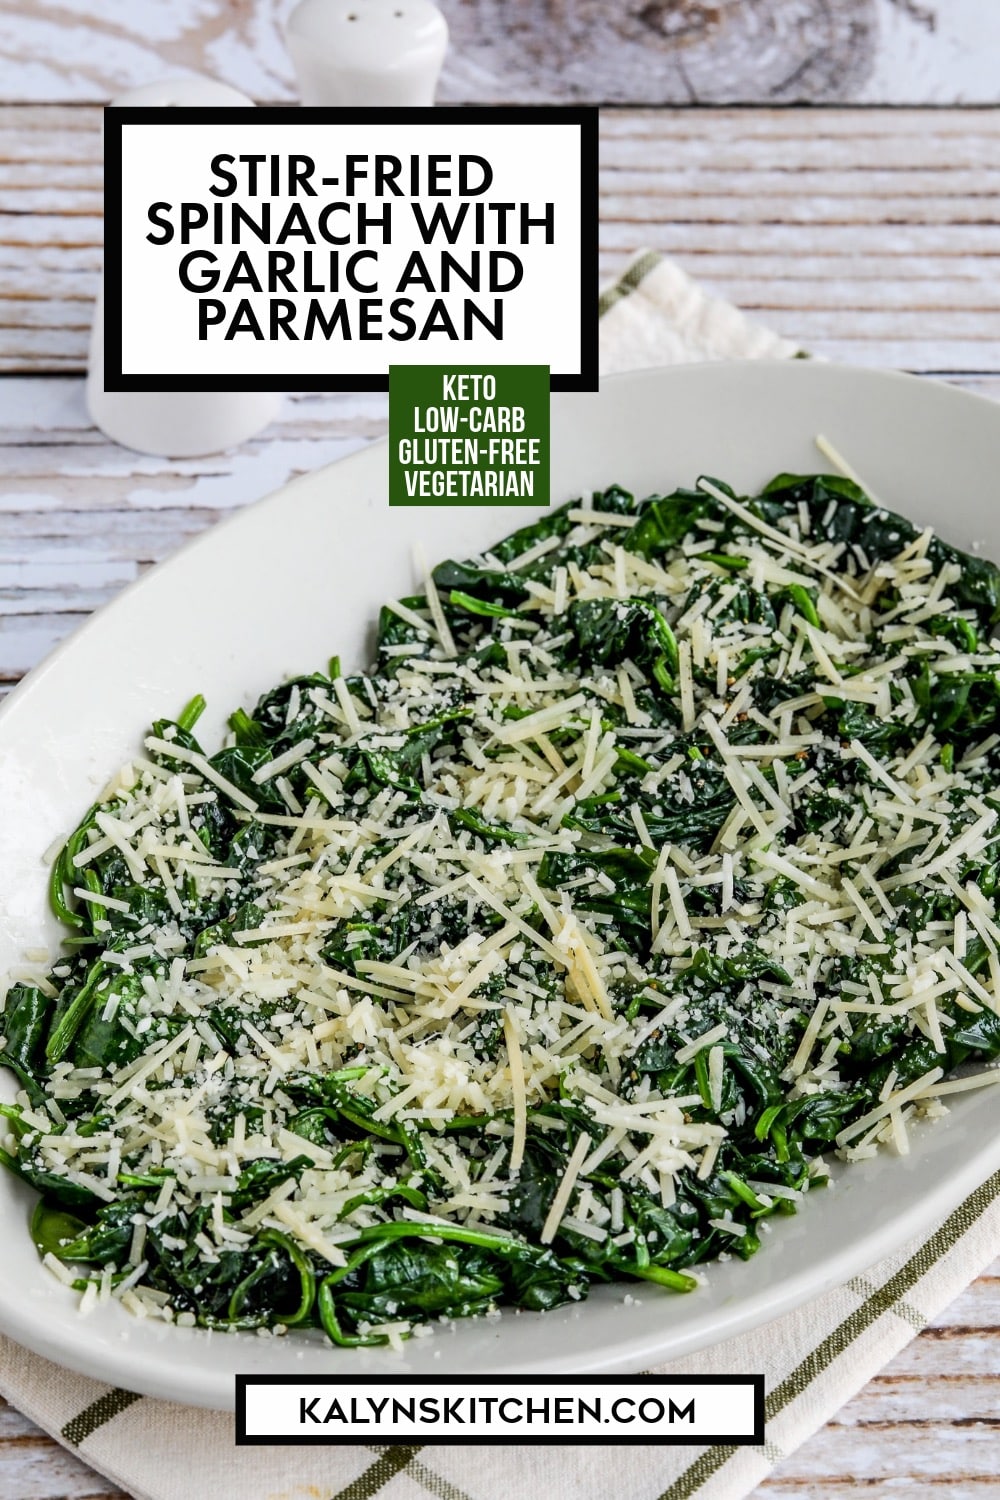 Pinterest image of Stir-Fried Spinach with Garlic and Parmesan